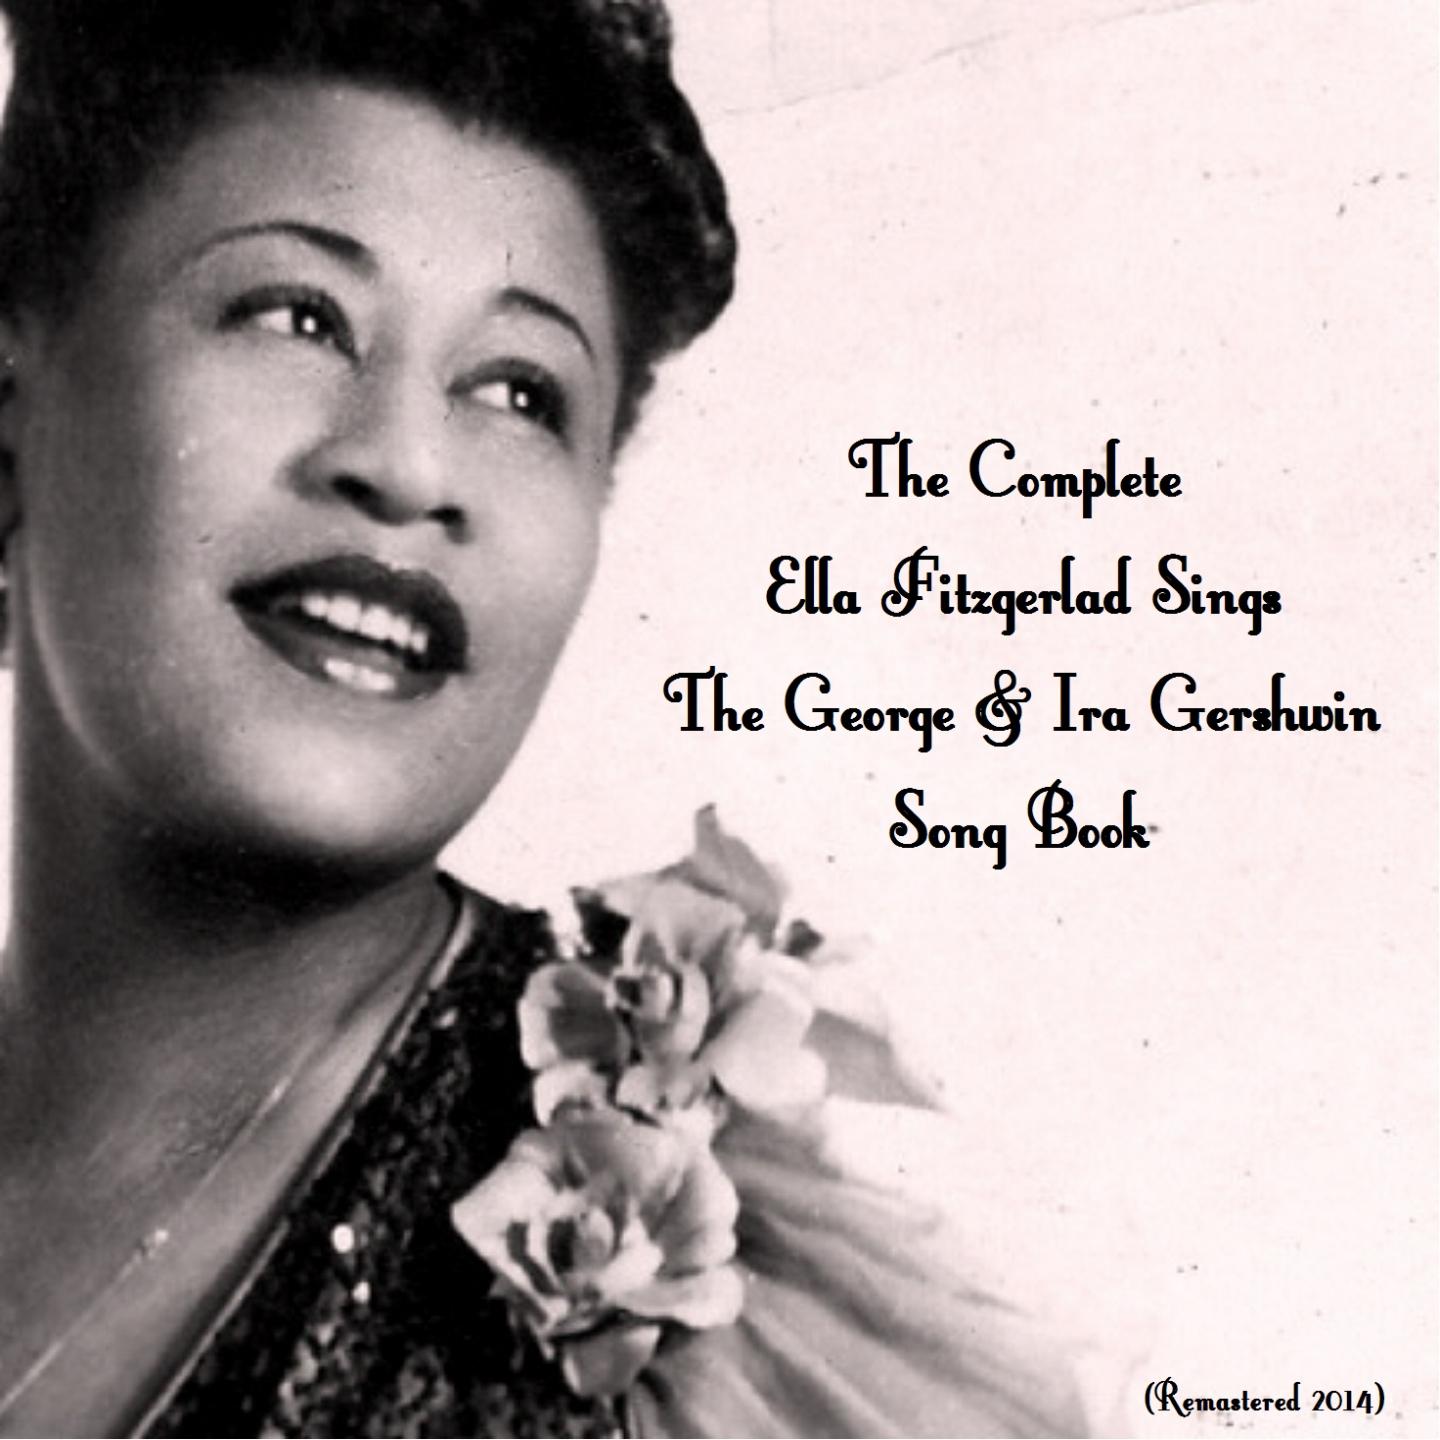 The Complete Ella Fitzgerald Sings the George & Ira Gershwin Song Book (Remastered 2014)